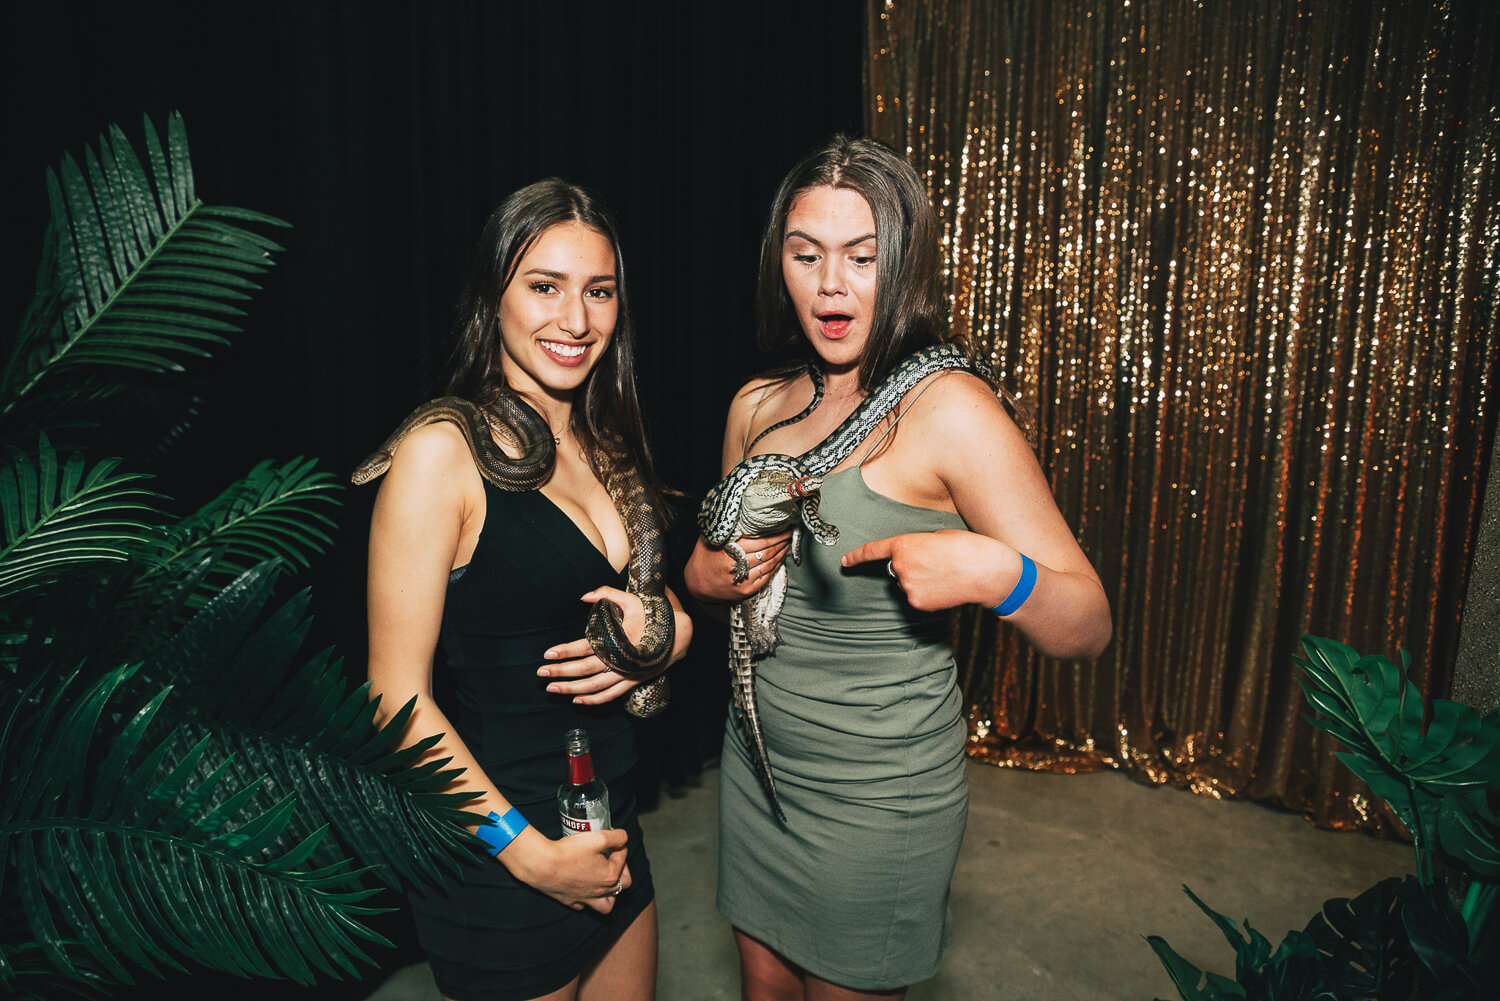 snake and croc handling at a jungle 18th party